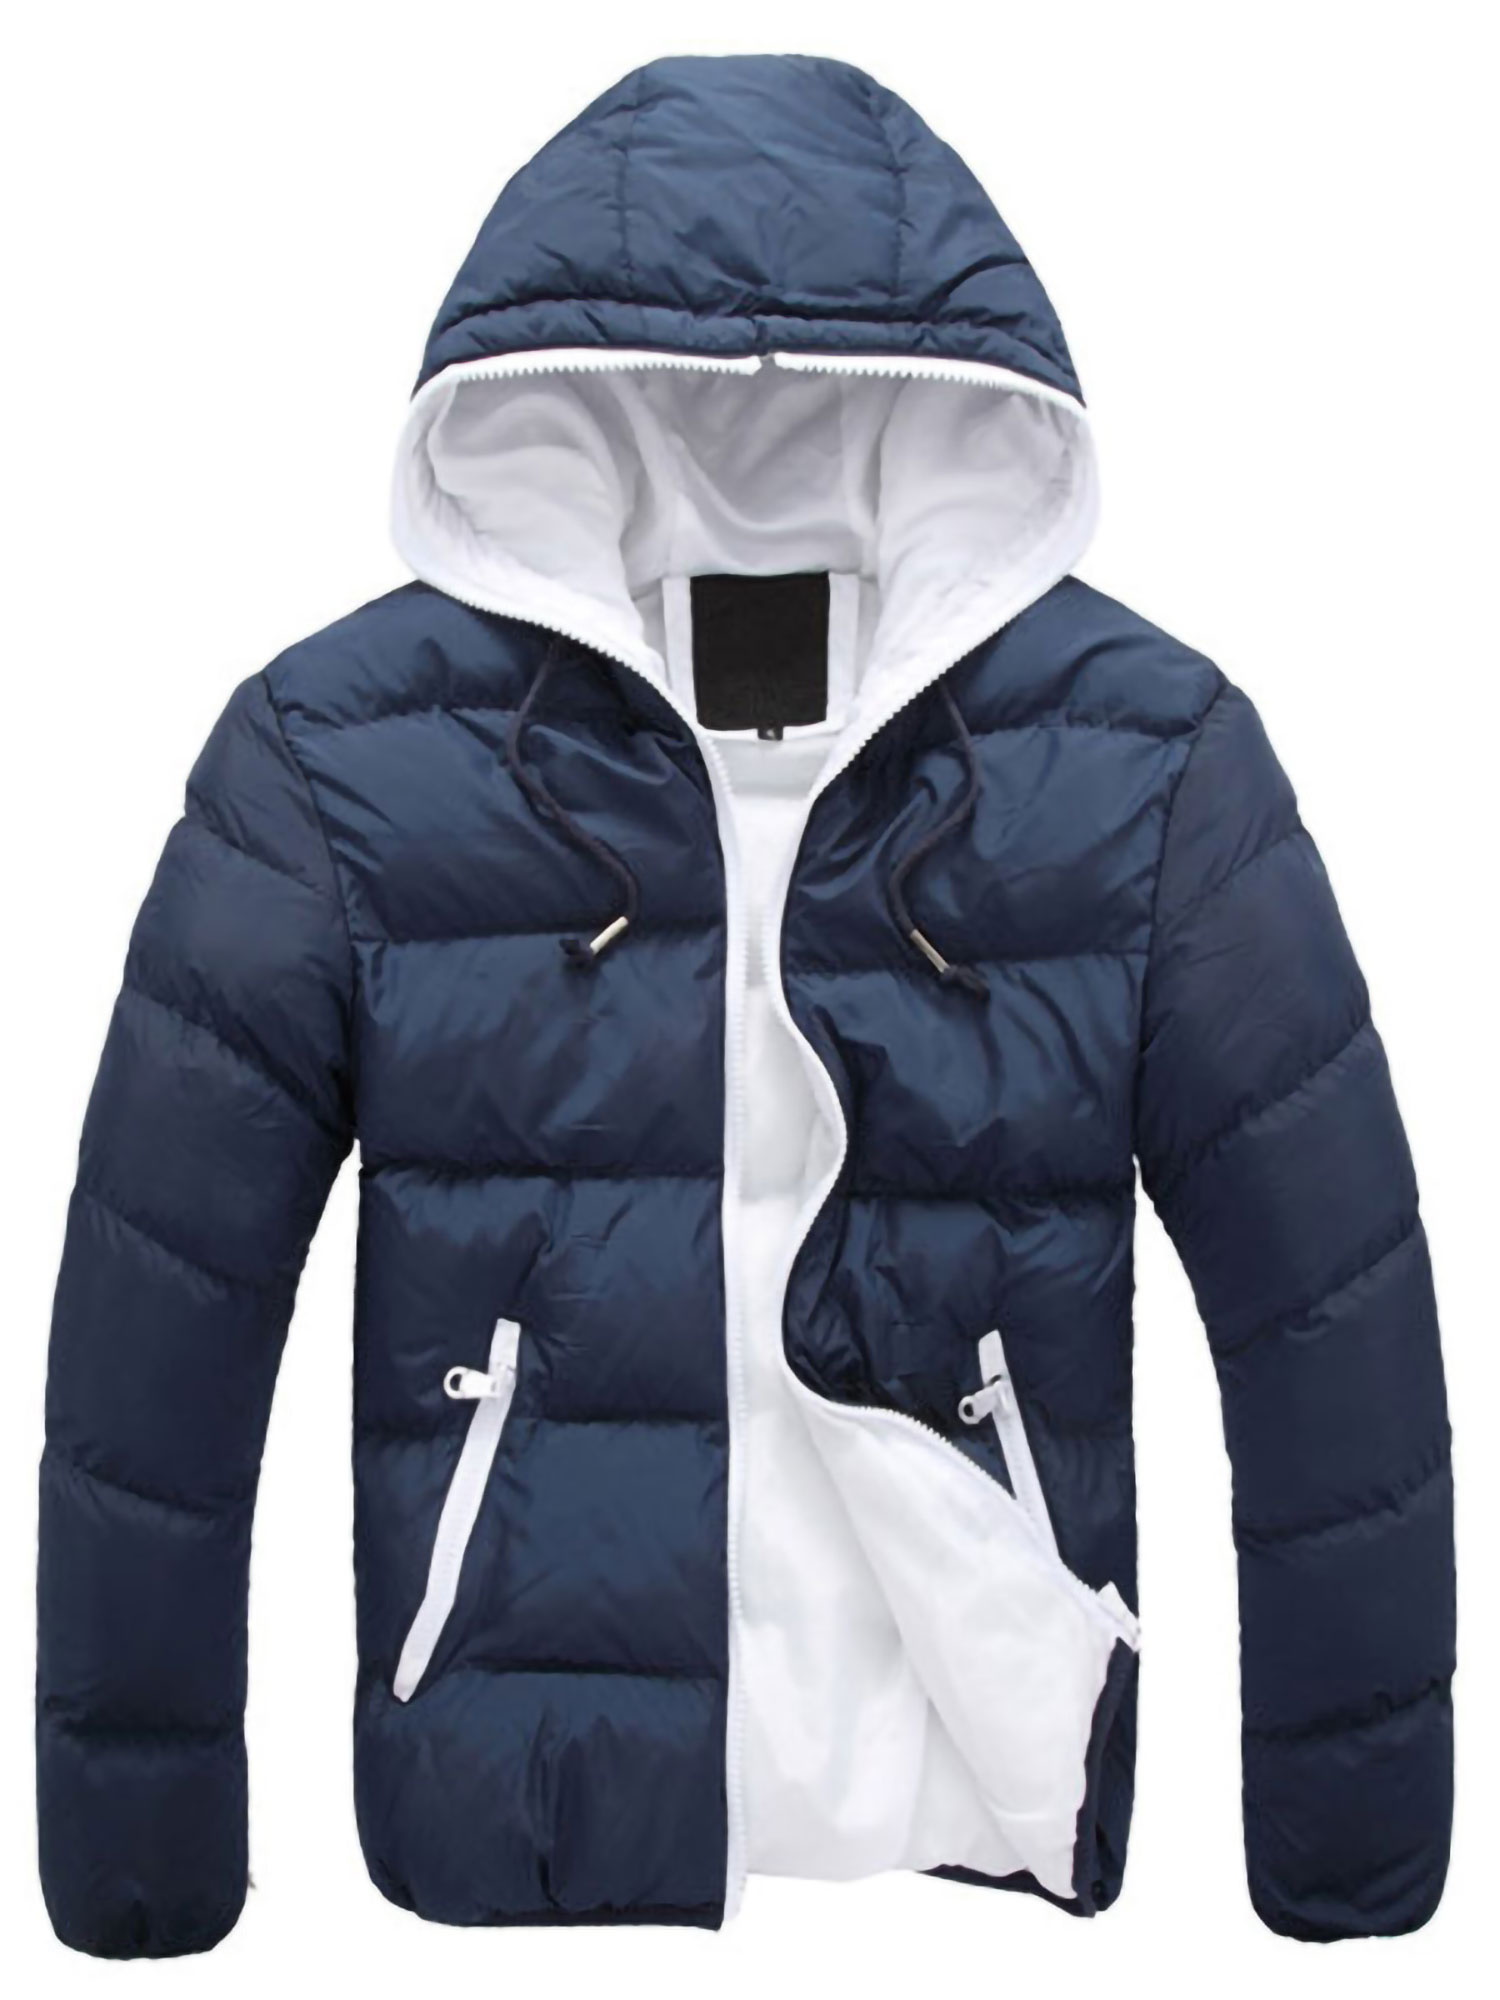 Men Fashion Puffer Jacket with Hooded Parkas Winter Windproof Padded Windbreaker Outwear Drawstring Down Coat for Mountain Outdoor - image 1 of 2